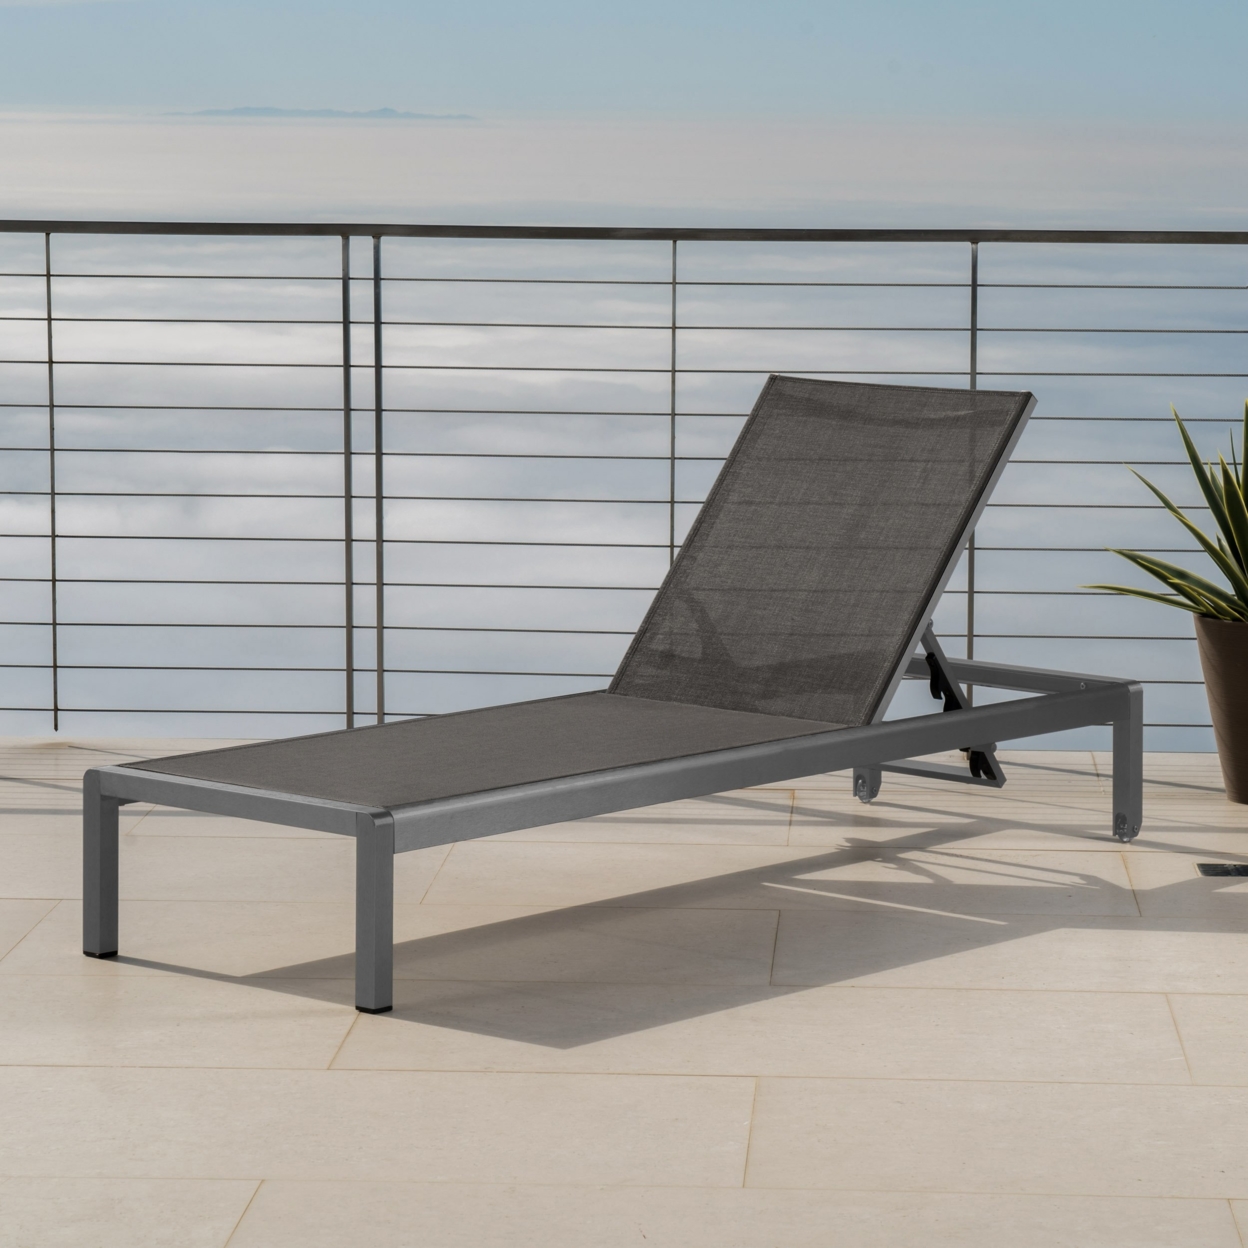 Crested Bay Outdoor Grey Aluminum Chaise Lounge With Dark Grey Mesh Seat - Grey, Single